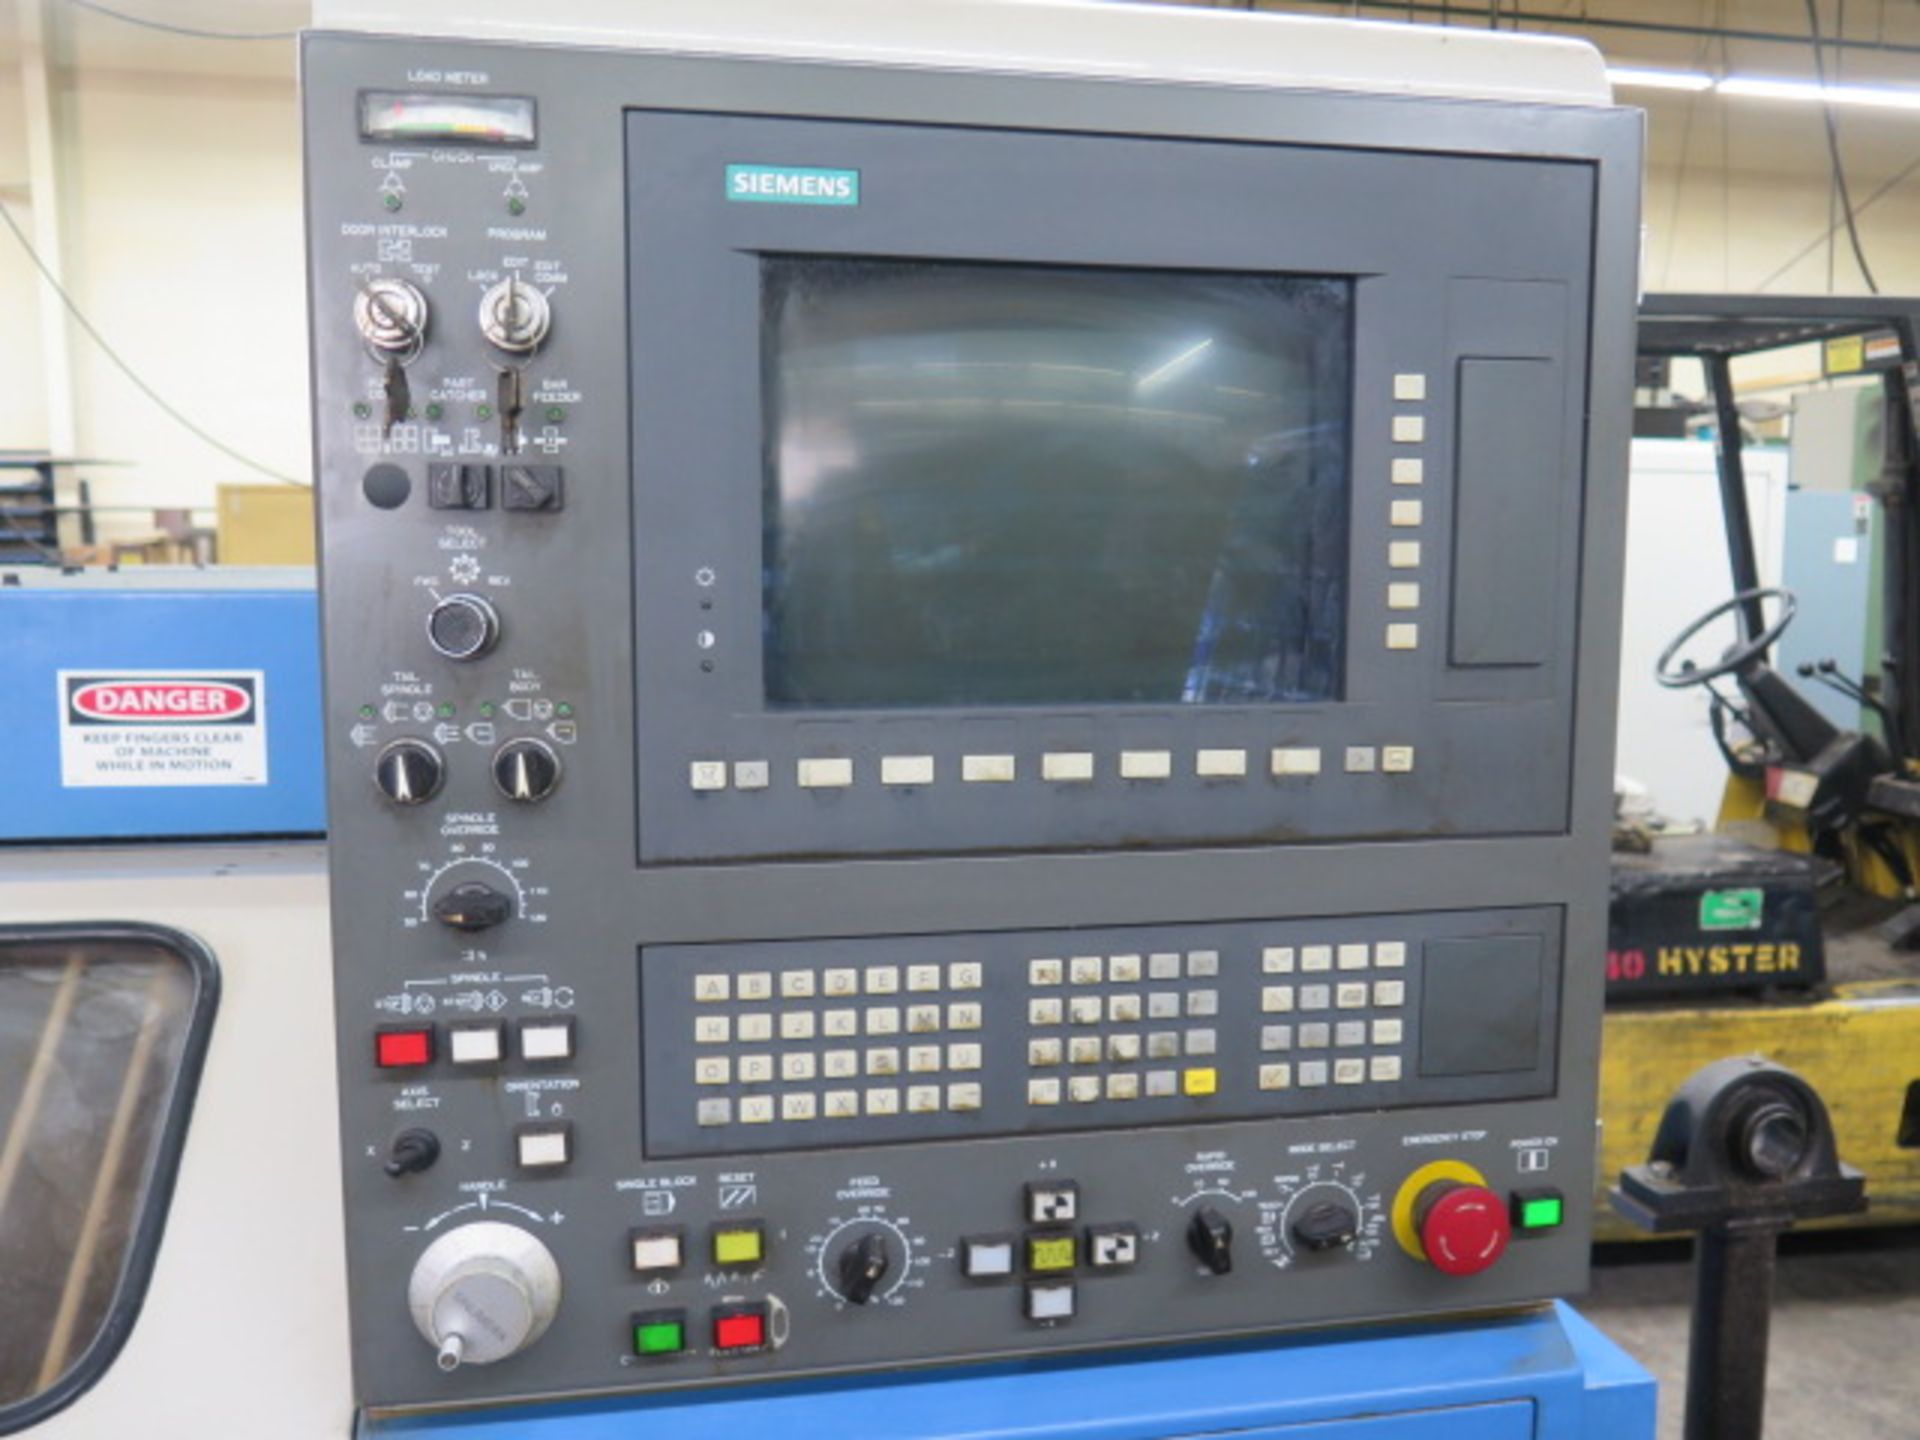 Hyundai HiT 15S CNC Turning Center s/n 5-009 w/ Siemens Controls, Tool Presetter, SOLD AS IS - Image 12 of 16